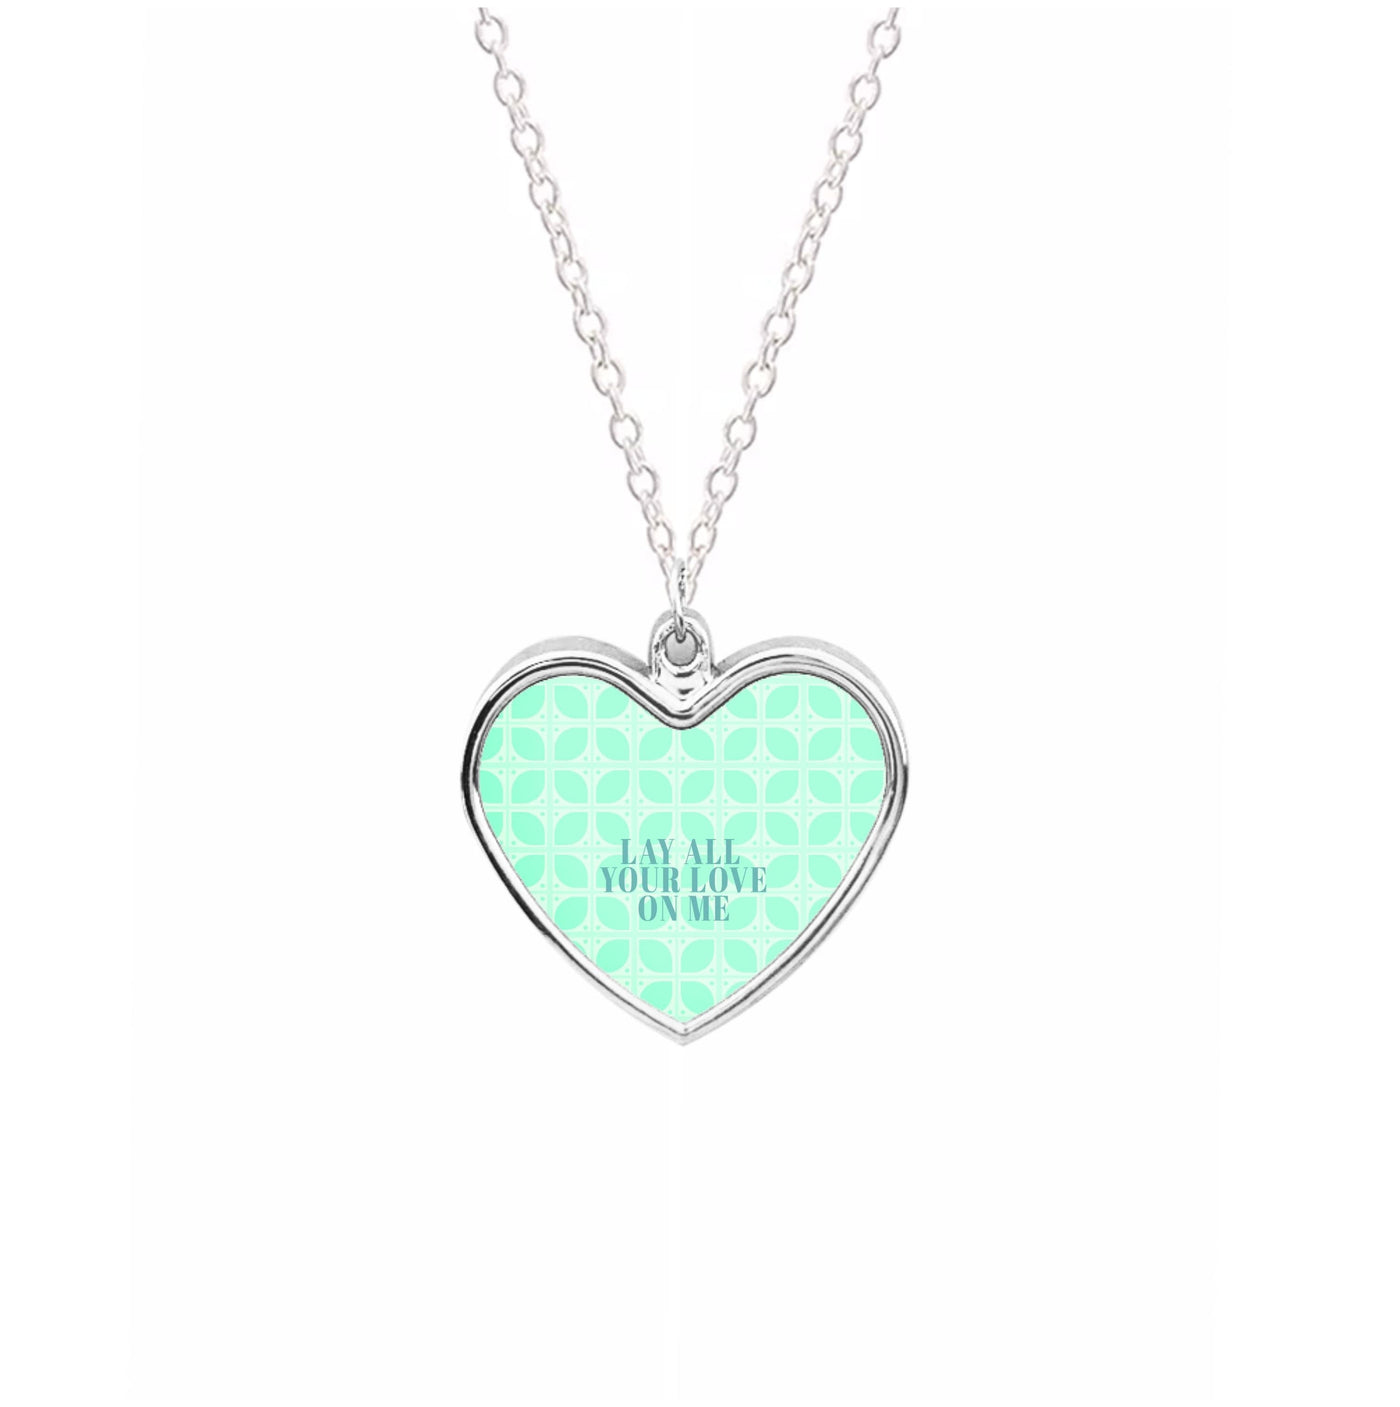 Lay All Your Love On Me - Mamma Mia Necklace